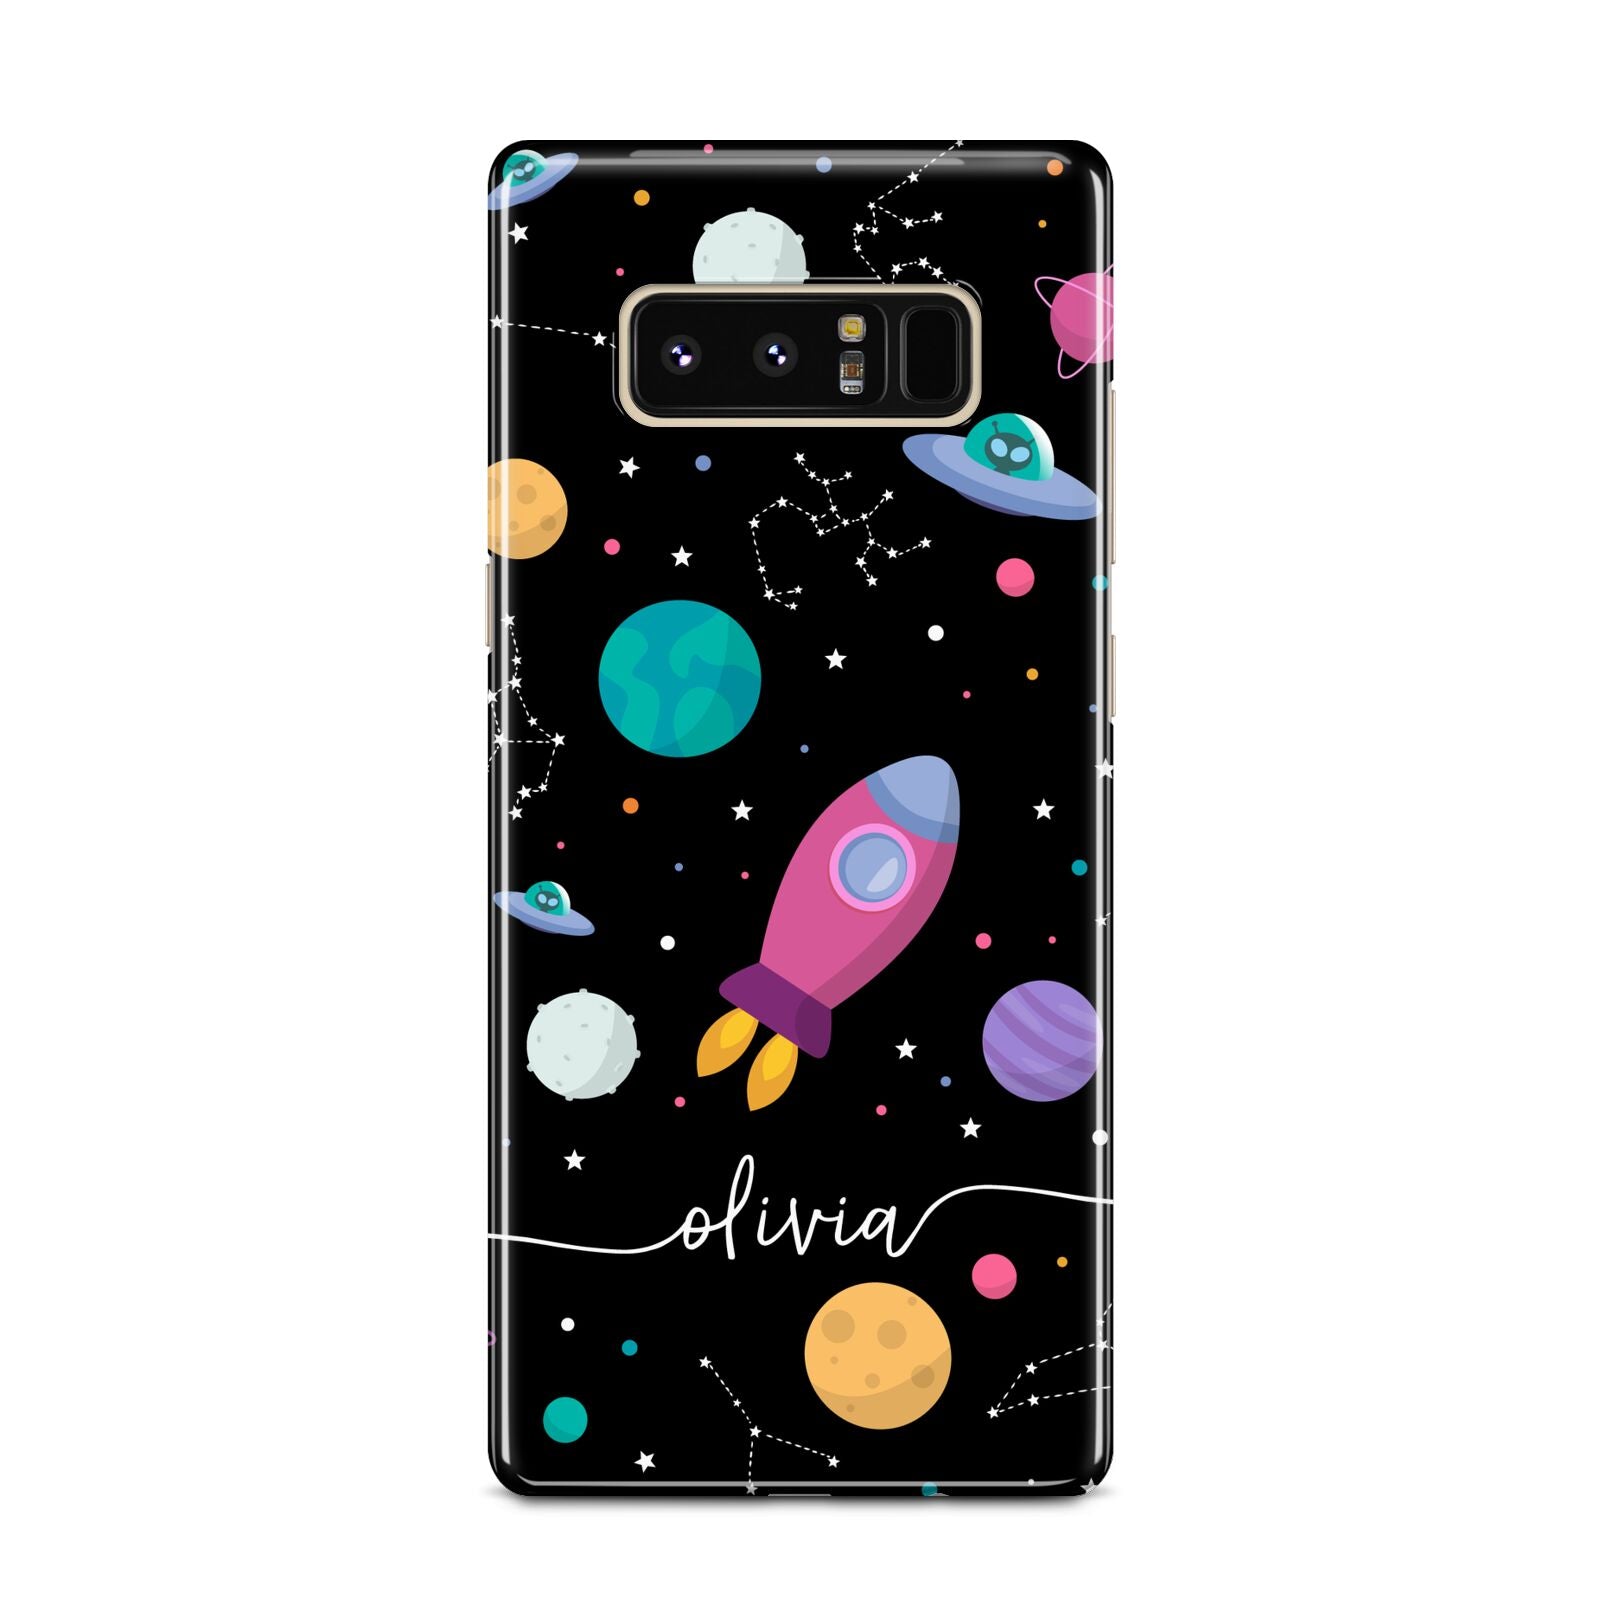 Galaxy Artwork with Name Samsung Galaxy Note 8 Case